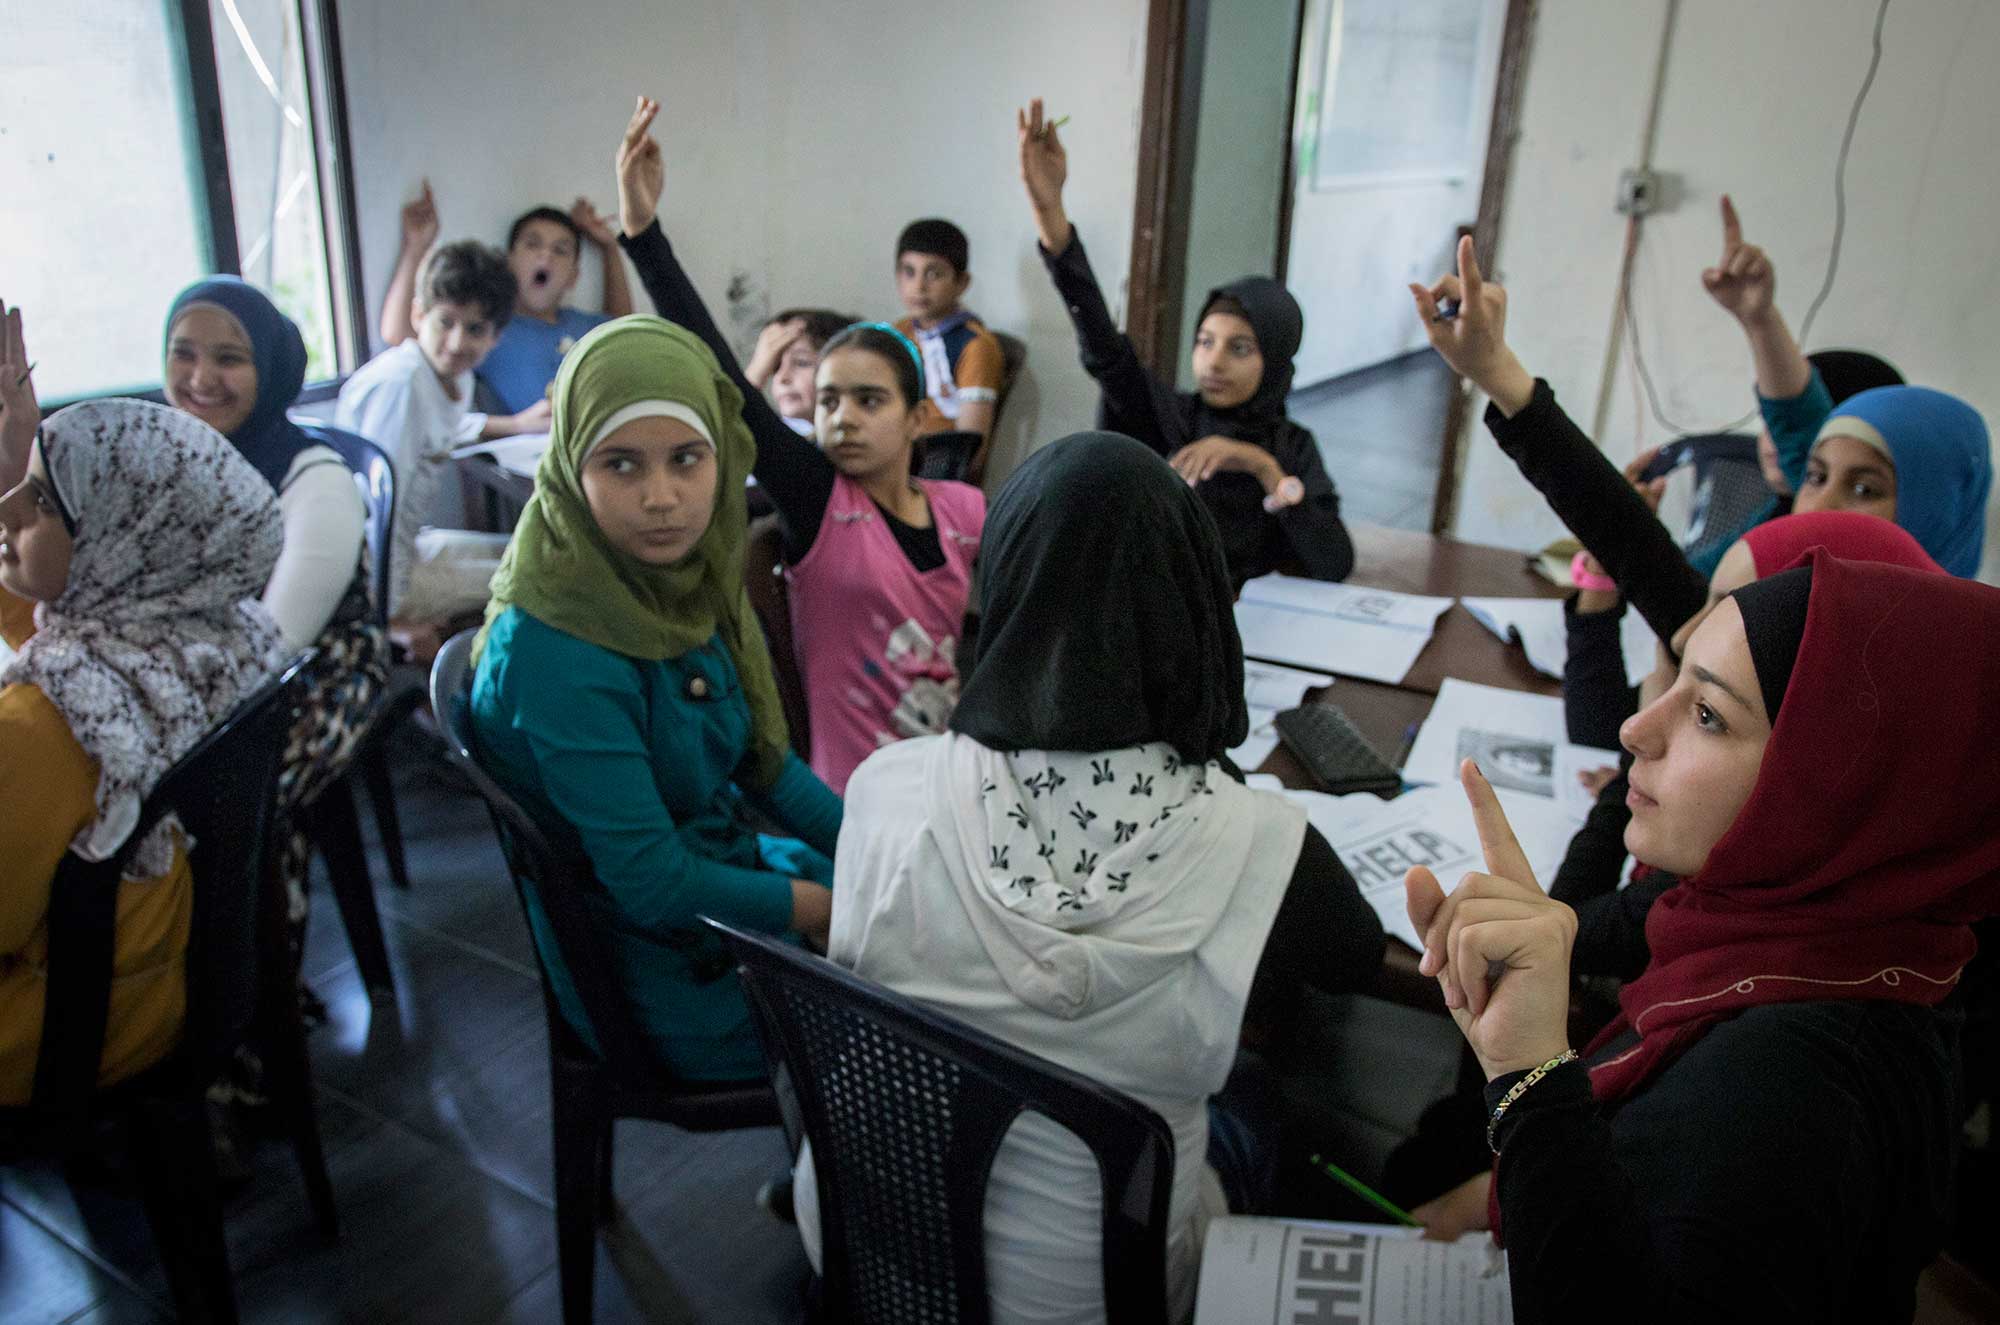 In this English class, 16 students are studying hard to improve their skills. The class is comprised of Syrian, Palestinian and Lebanese youth.